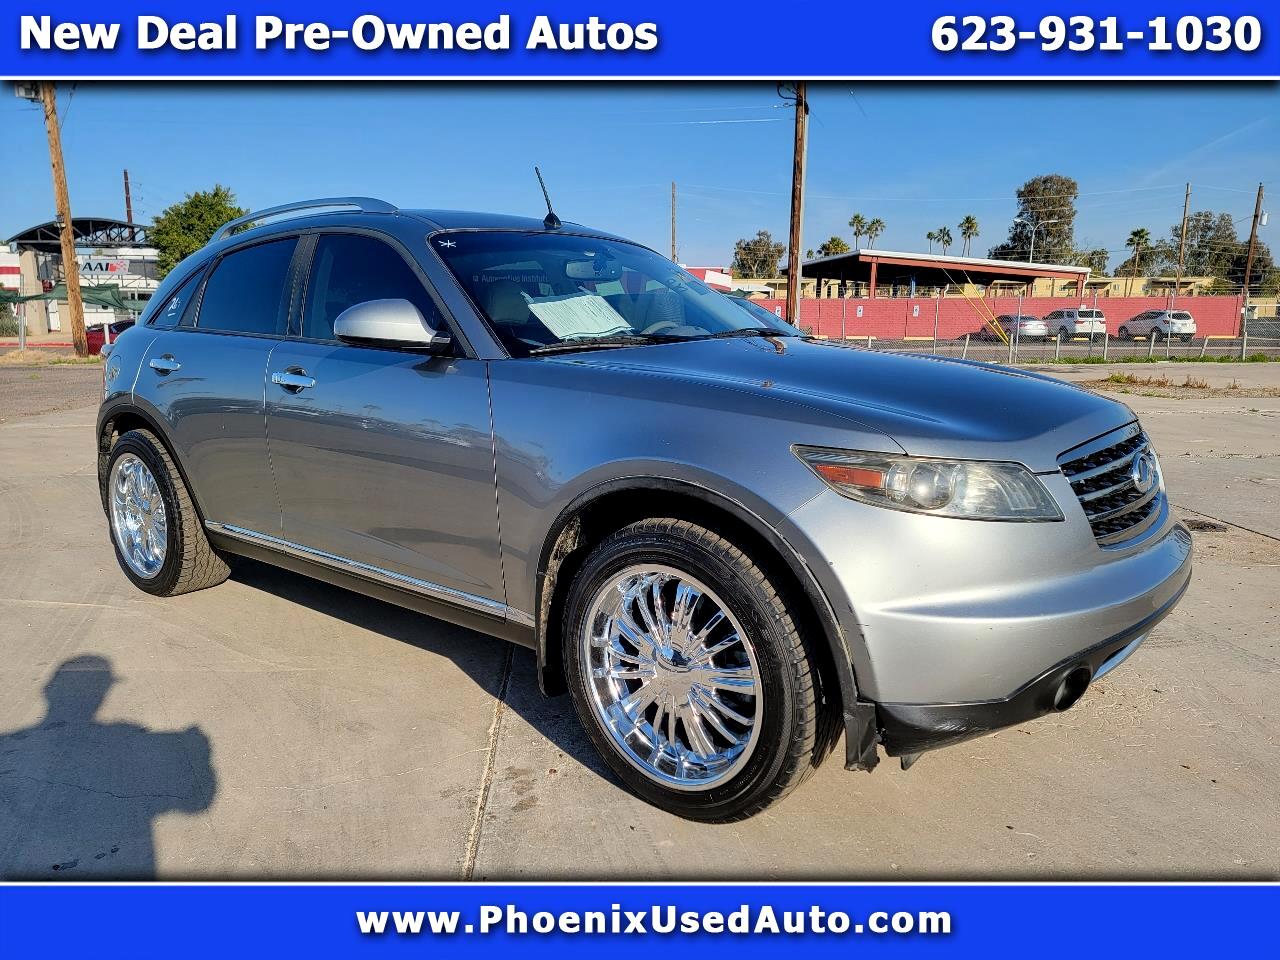 Used 2008 Infiniti FX35 RWD 4dr for Sale in Phoenix AZ 85301 New Deal  Pre-Owned Autos